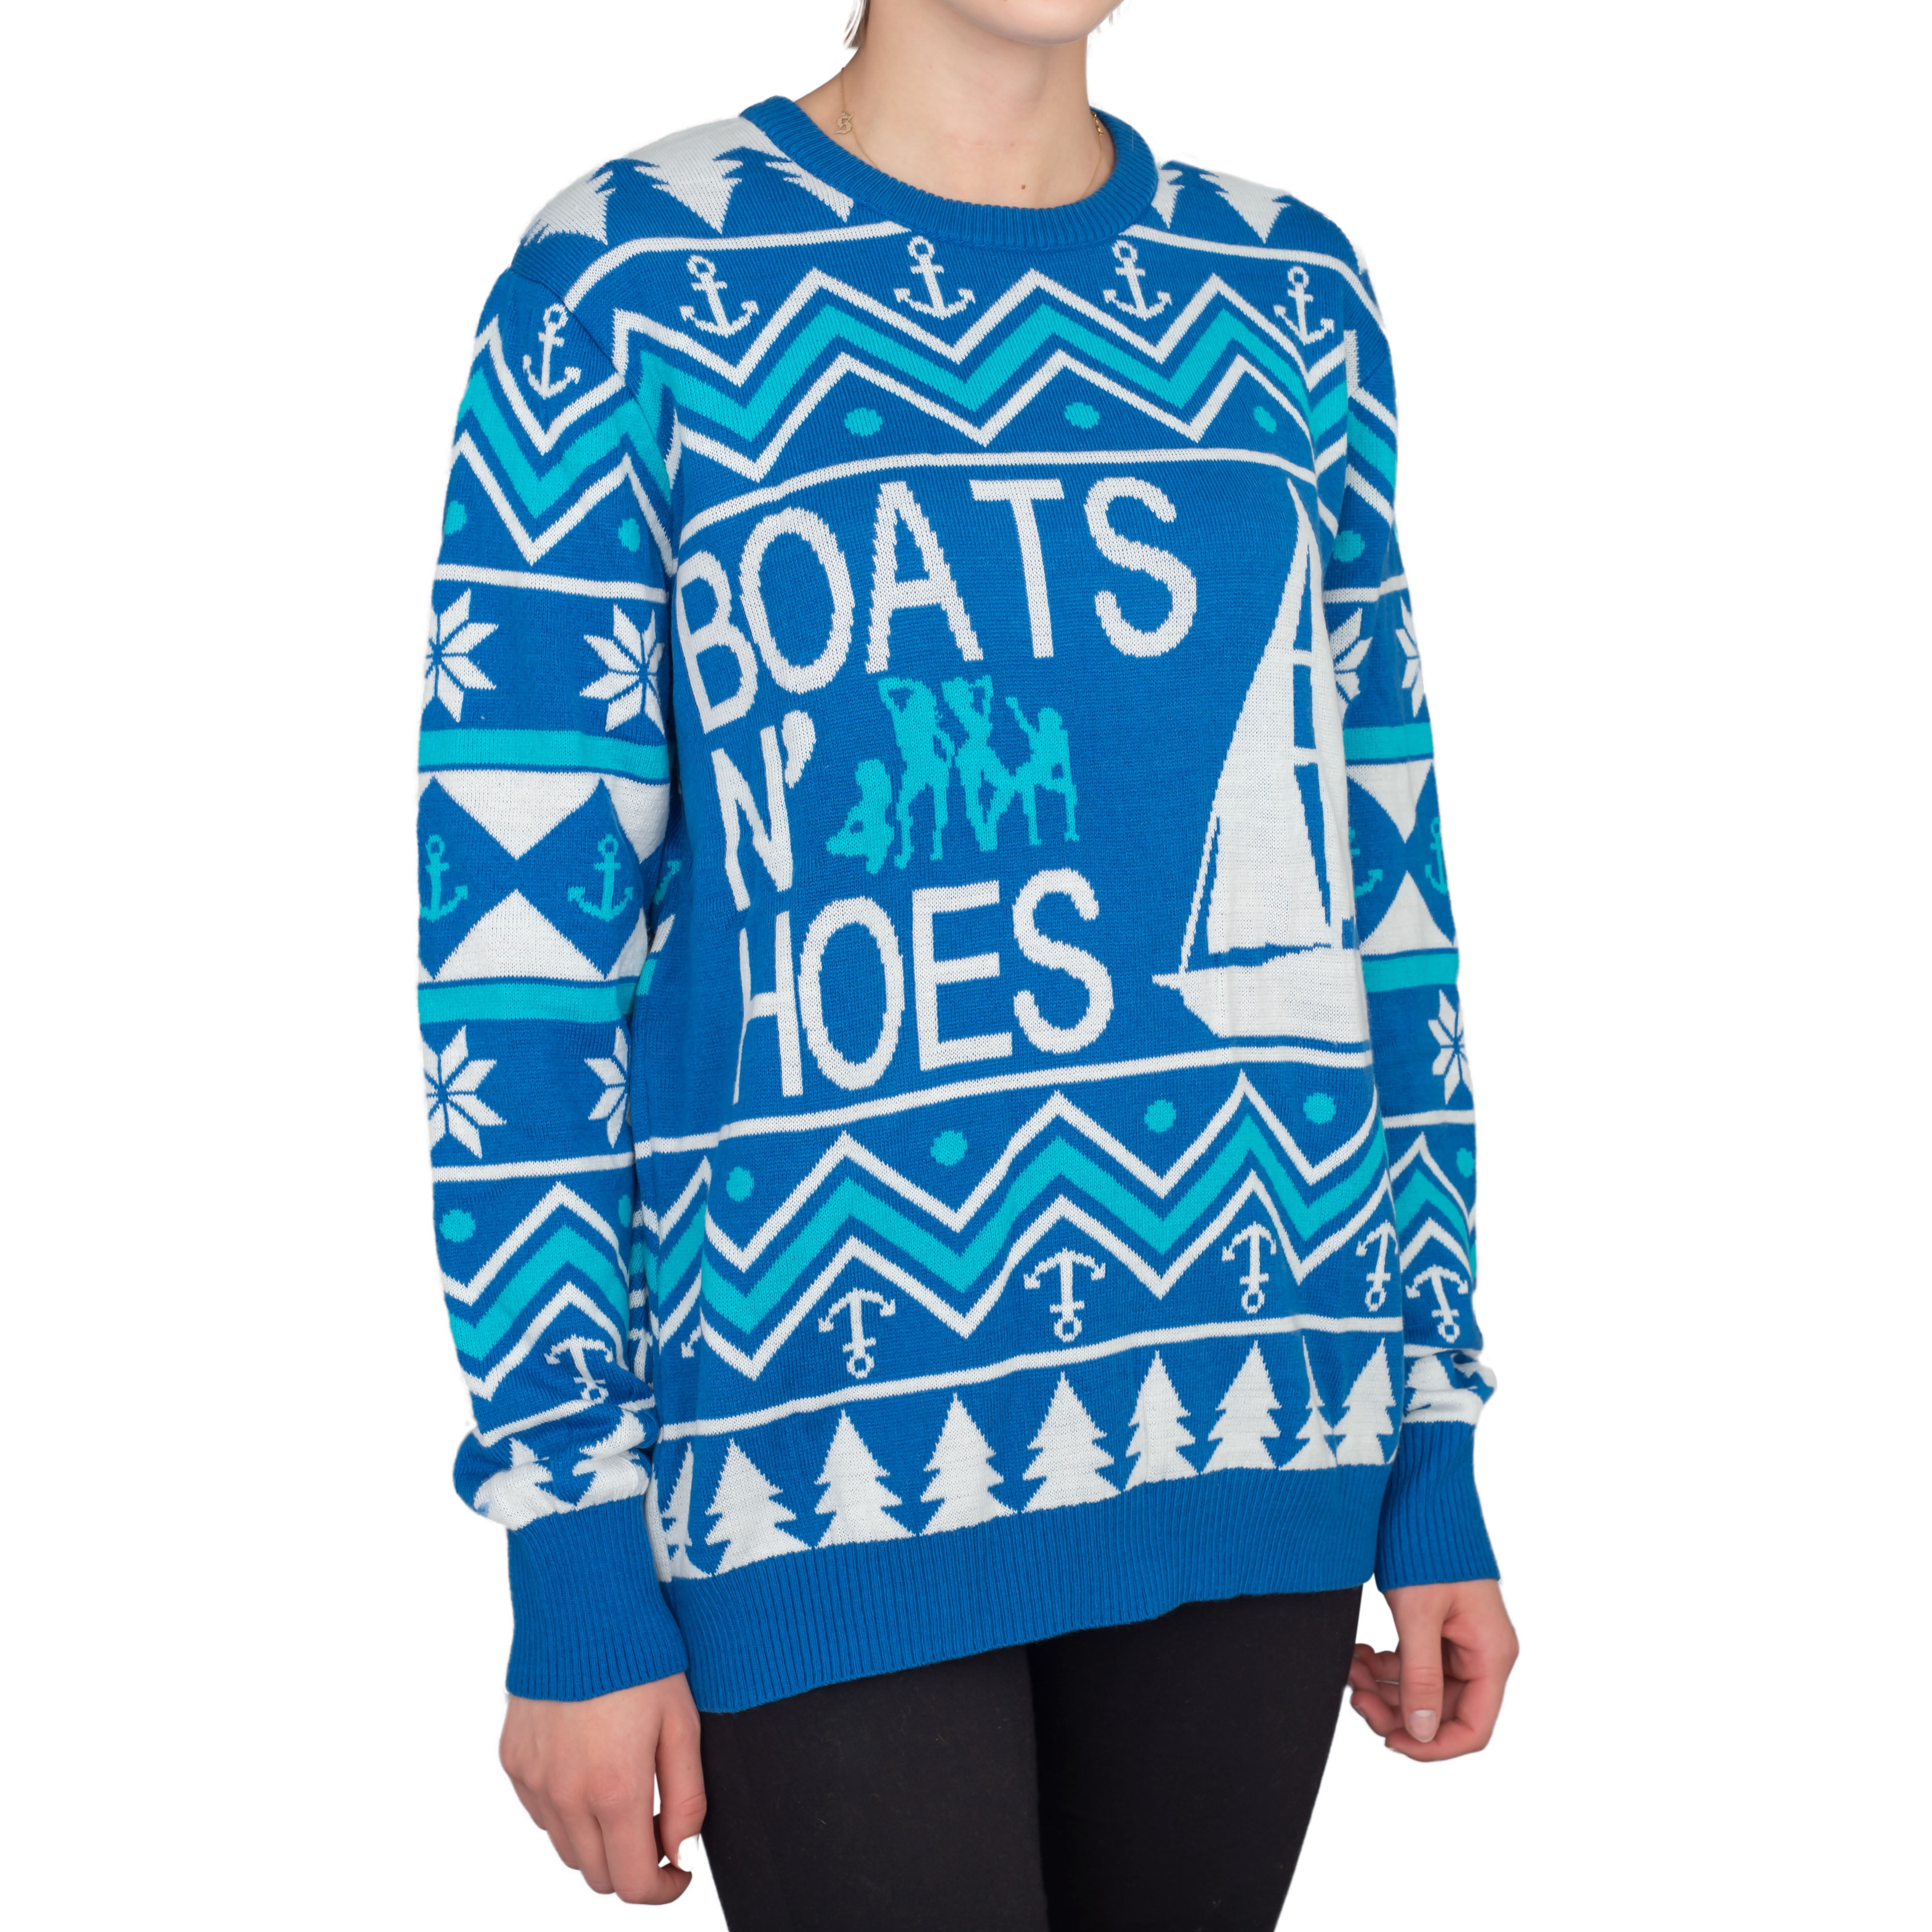 Men's Boats And Hoes Christmas Sweater. Step Brothers Ugly Sweaters.